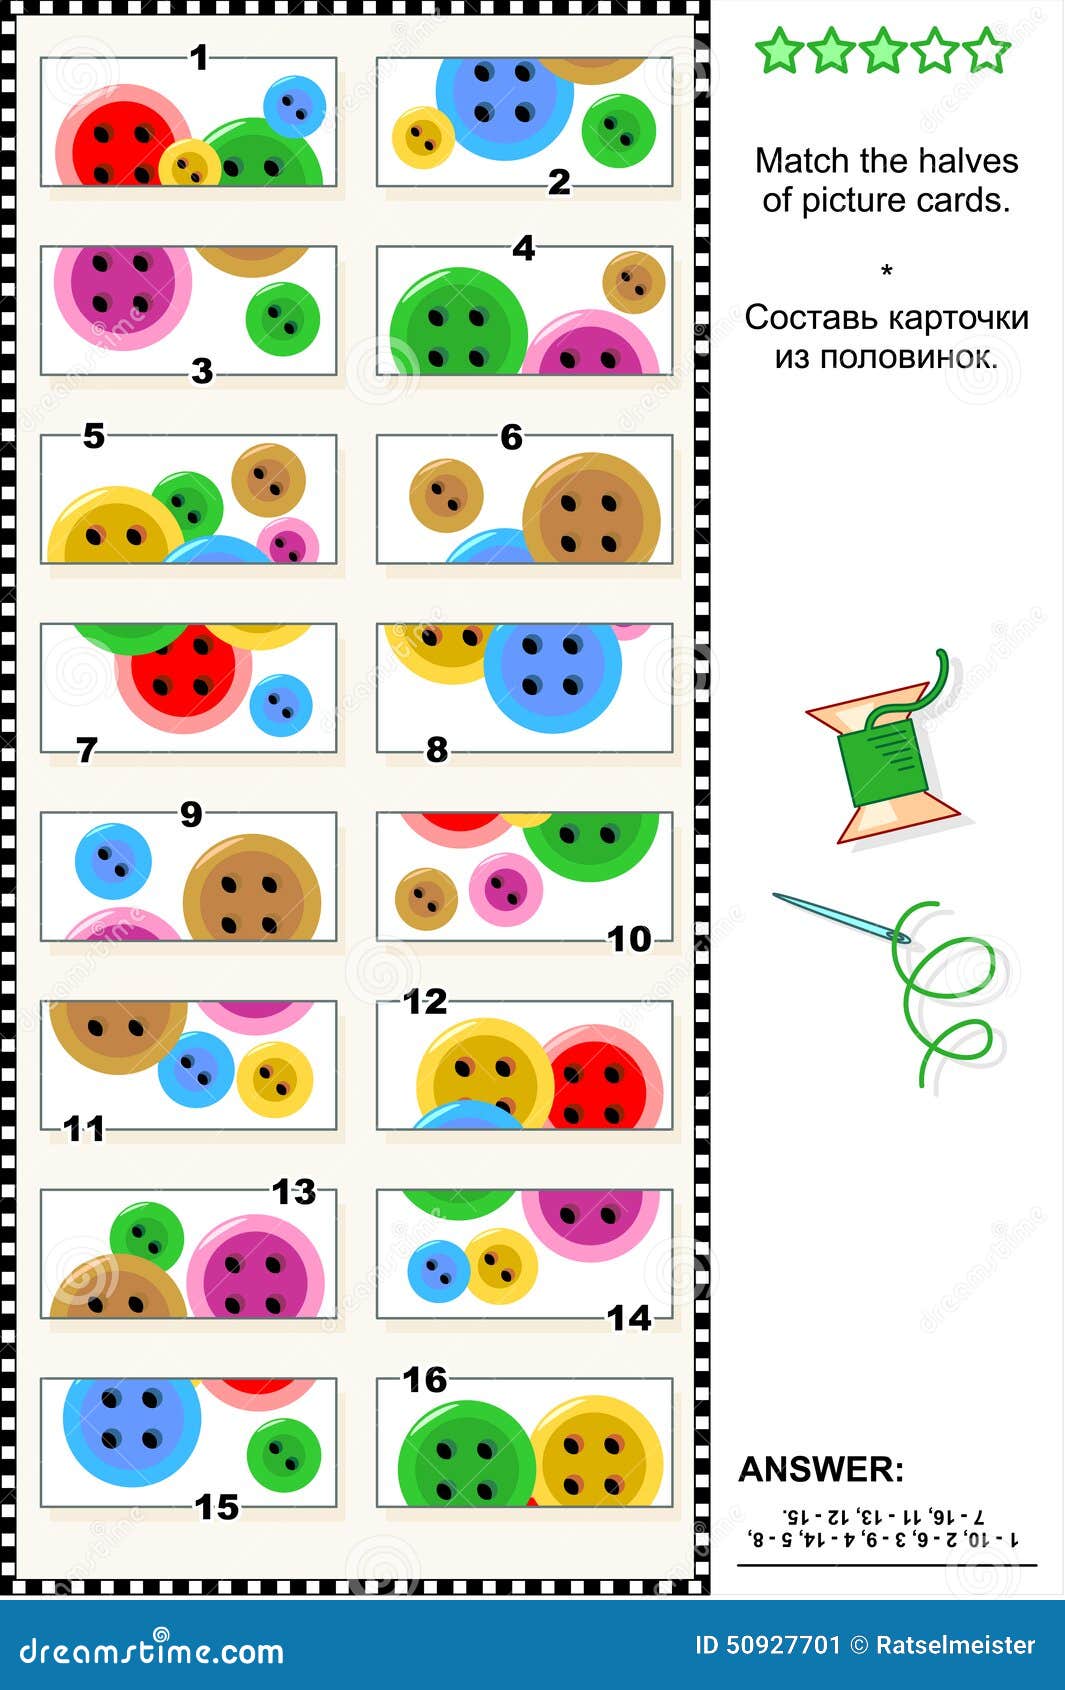 visual riddle - match the halves - colorful buttons